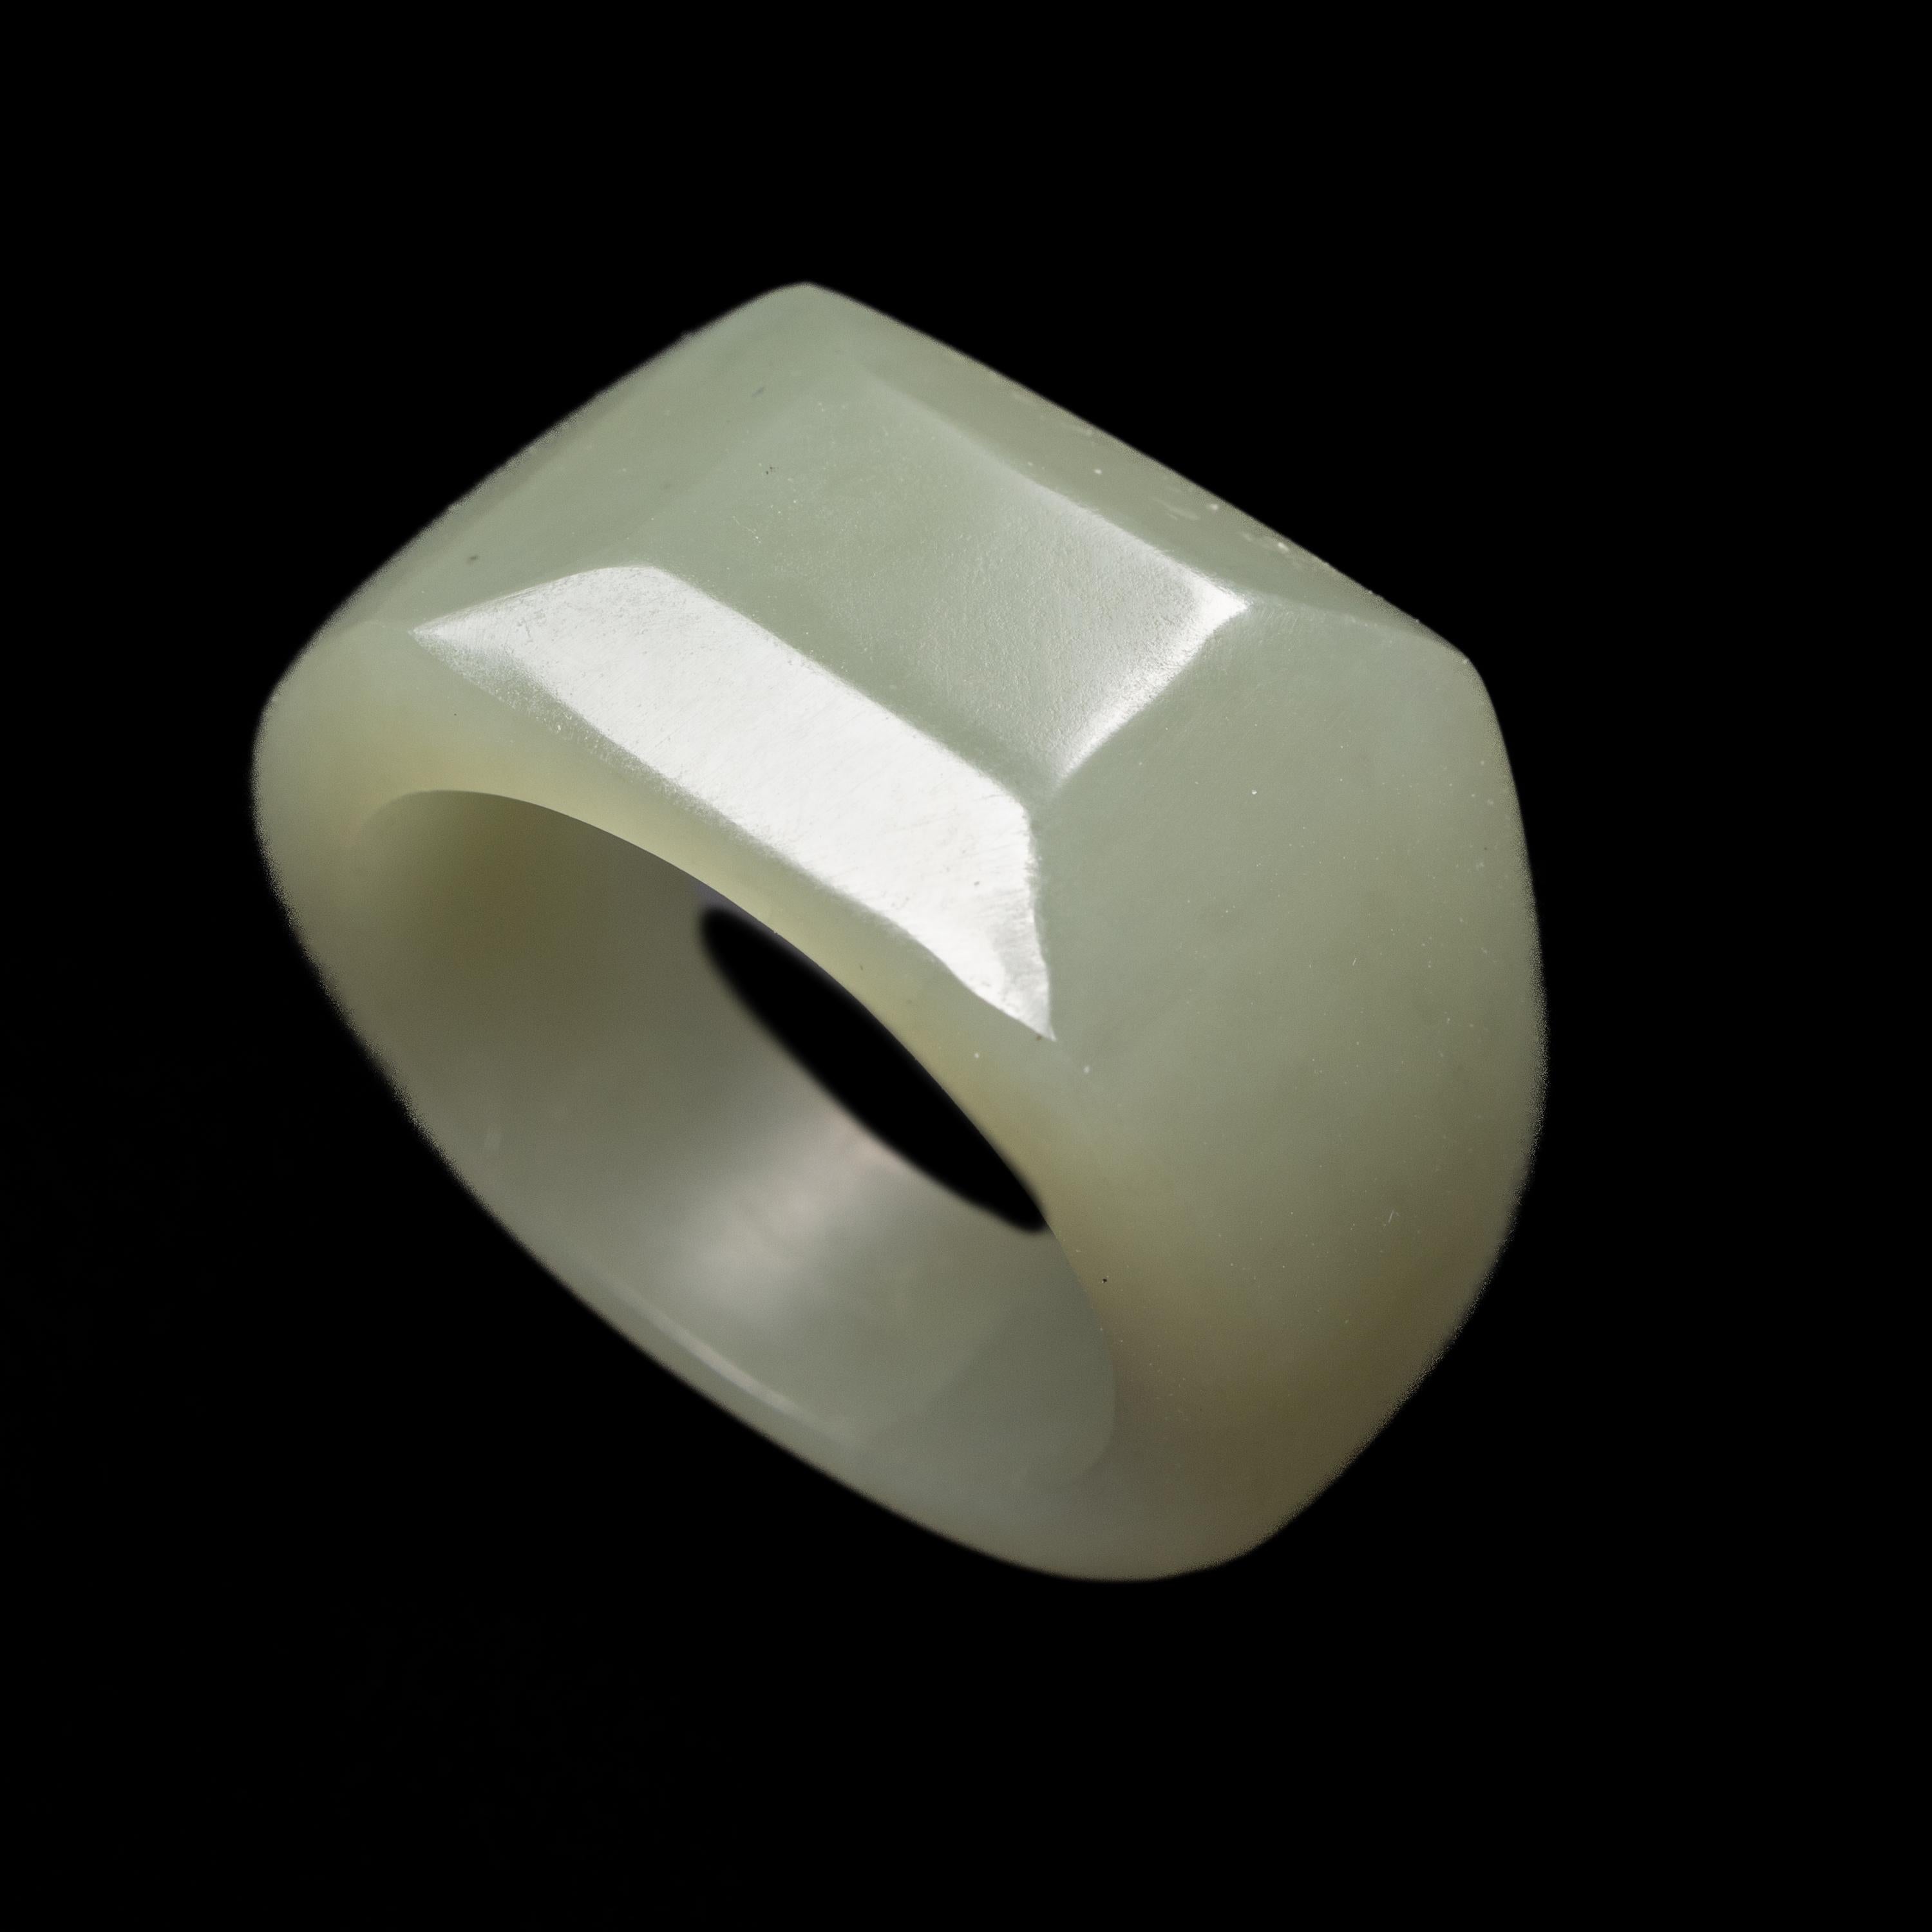 Masterfully carved by a lapidary artist in China -nationally recognized- from light grayish-green fine Chinese nephrite, this is no ordinary carved jade ring. It features a flat surface atop chamfered edges, giving it a distinctly modern